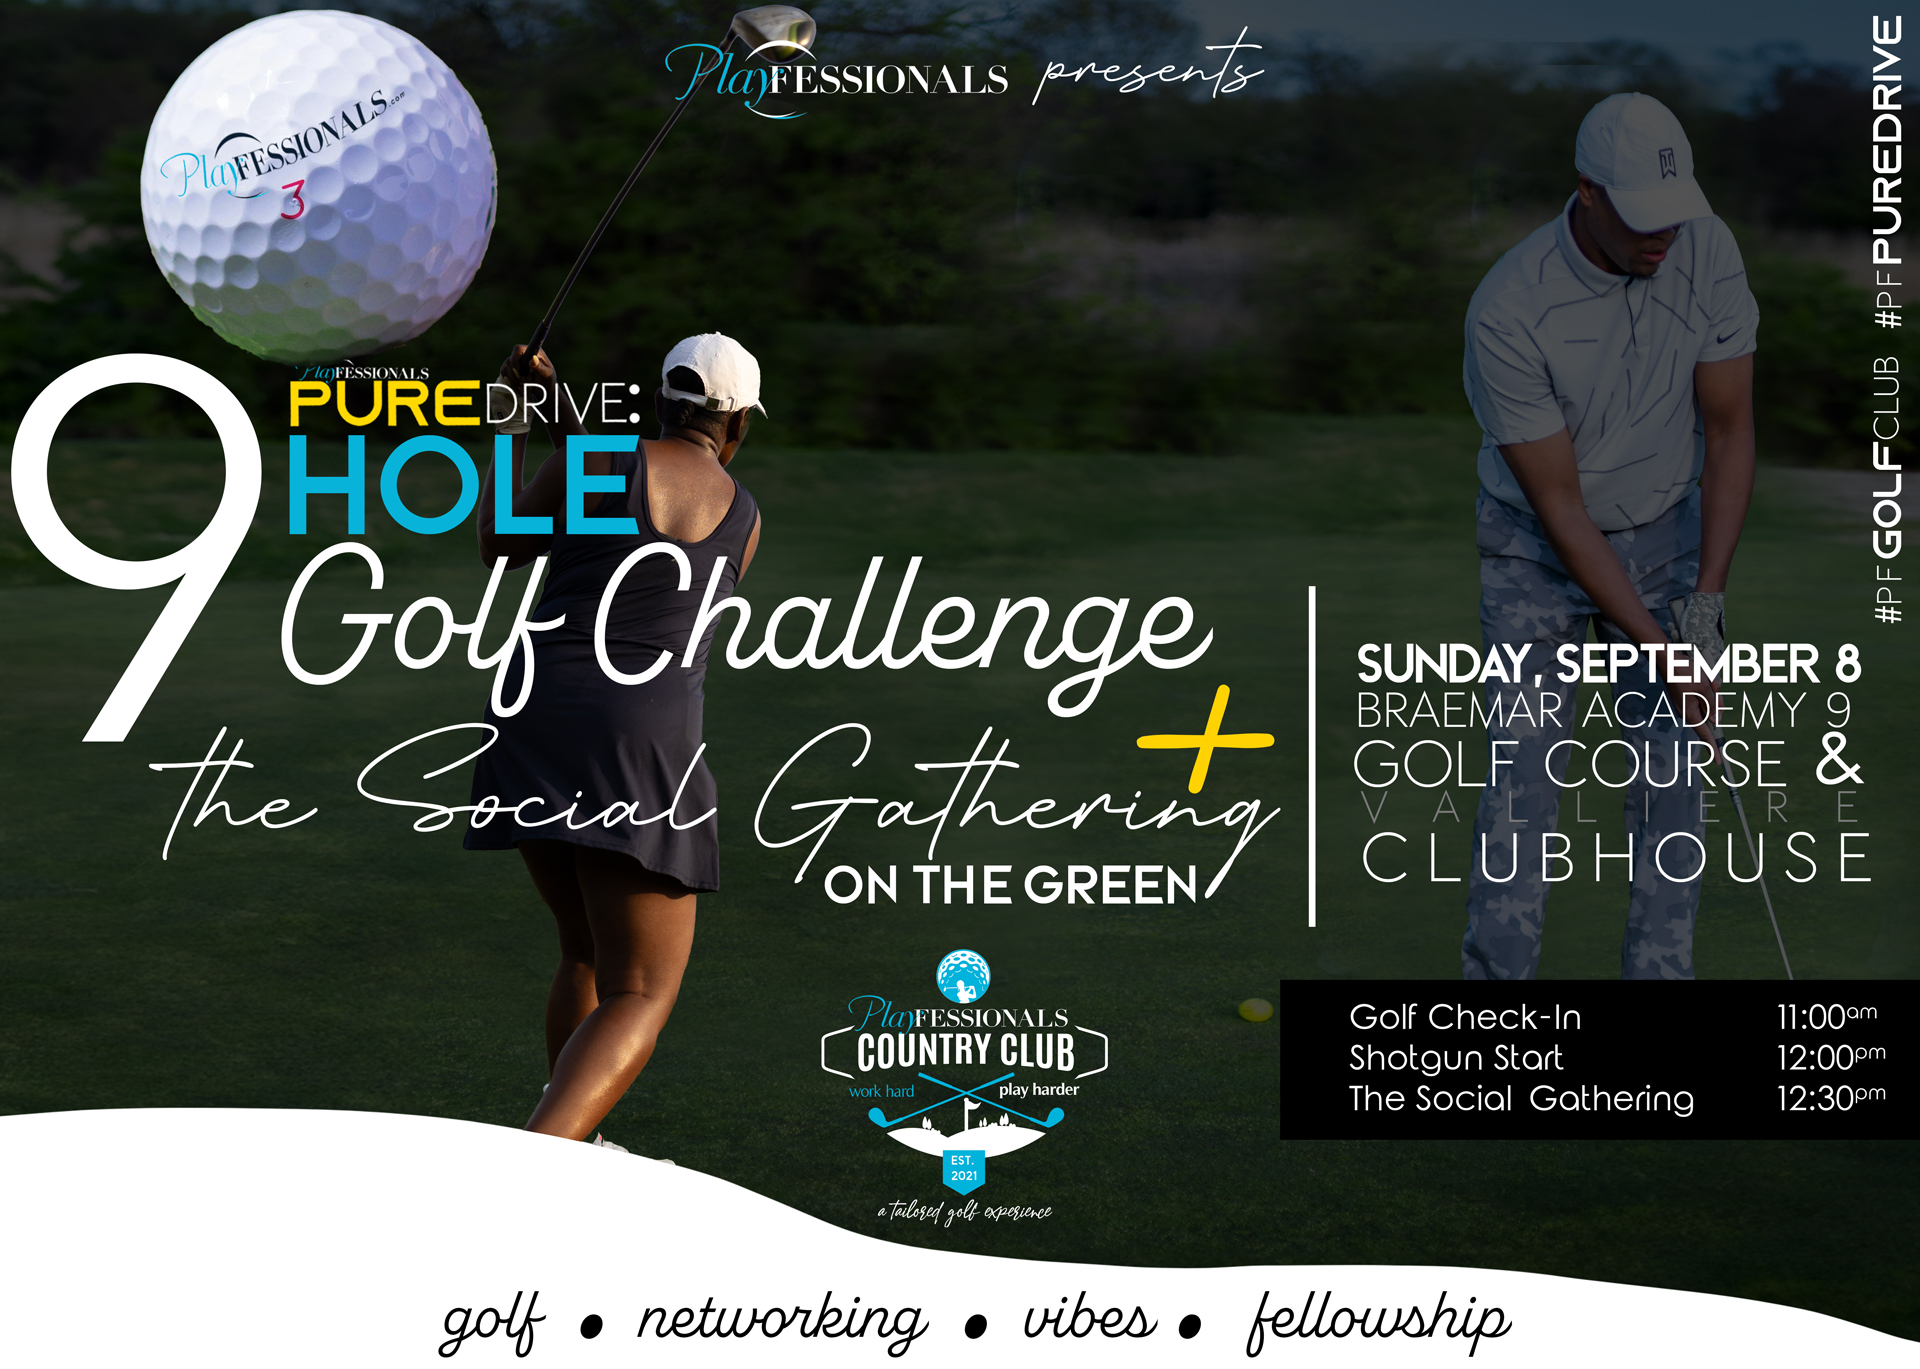 Playfessionals PureDrive: 9-Hole Golf Challenge + the Social Gathering on the green